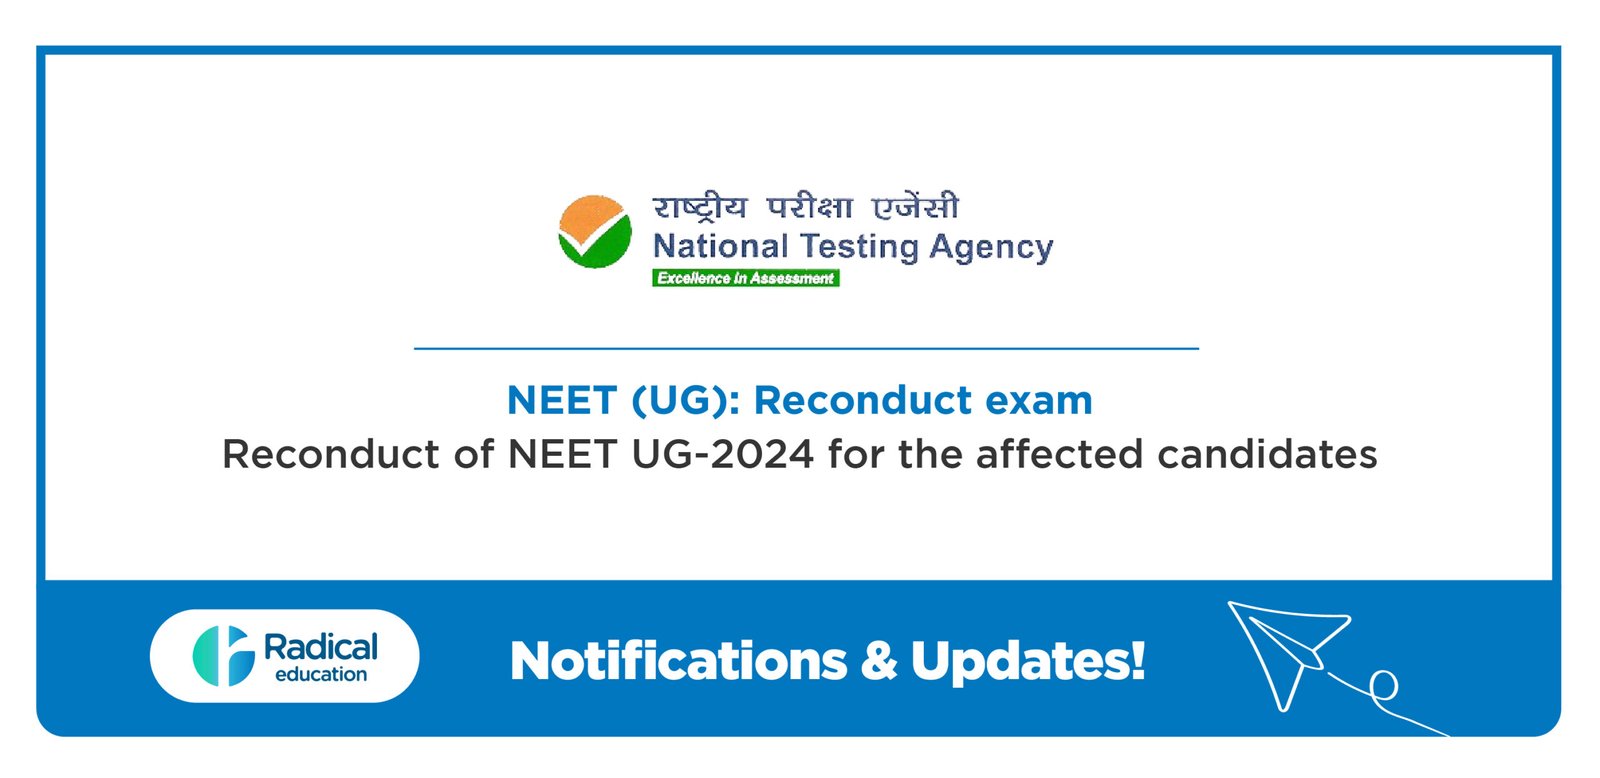 Reconduct of NEET UG-2024 for the affected candidates